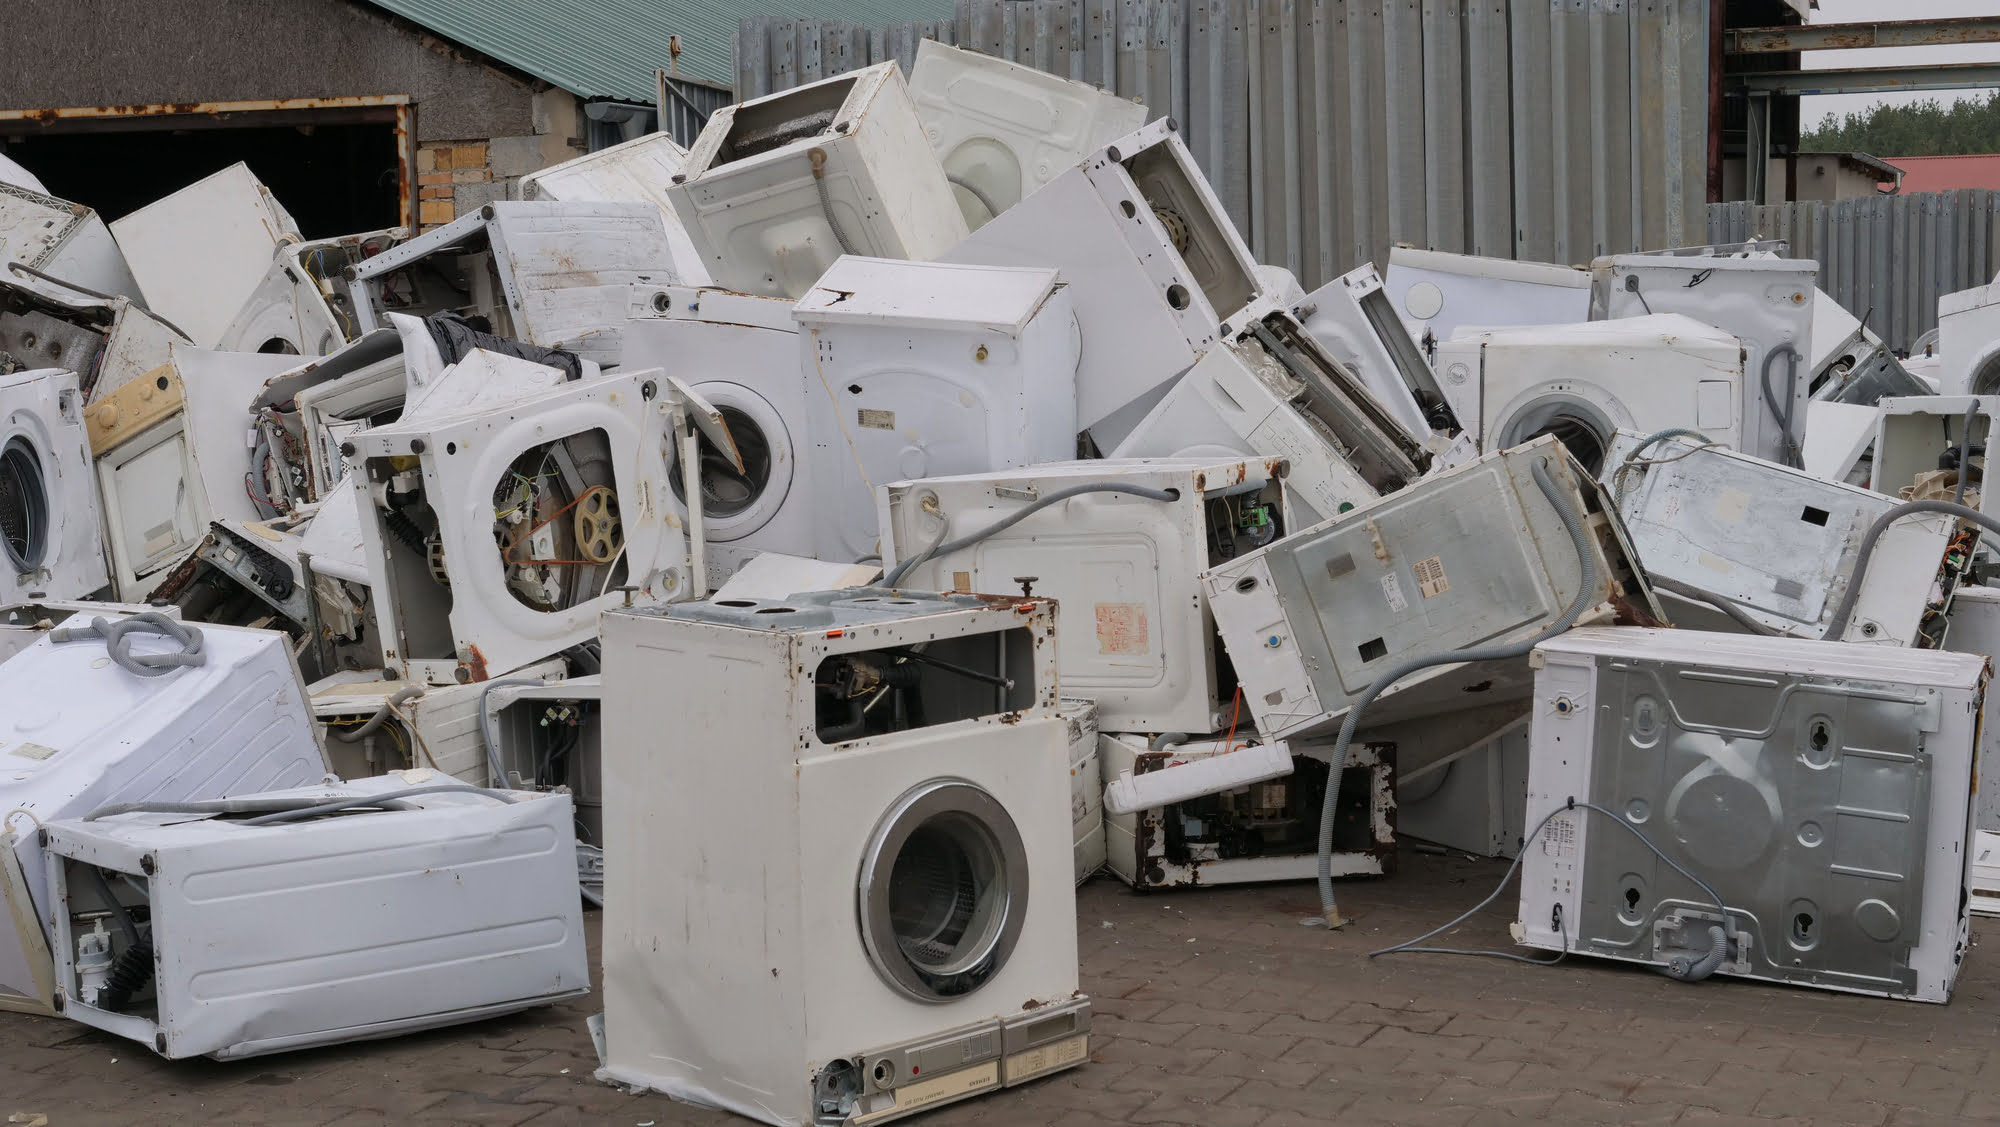 pile of broken washing machines and dryers at a scrapyard